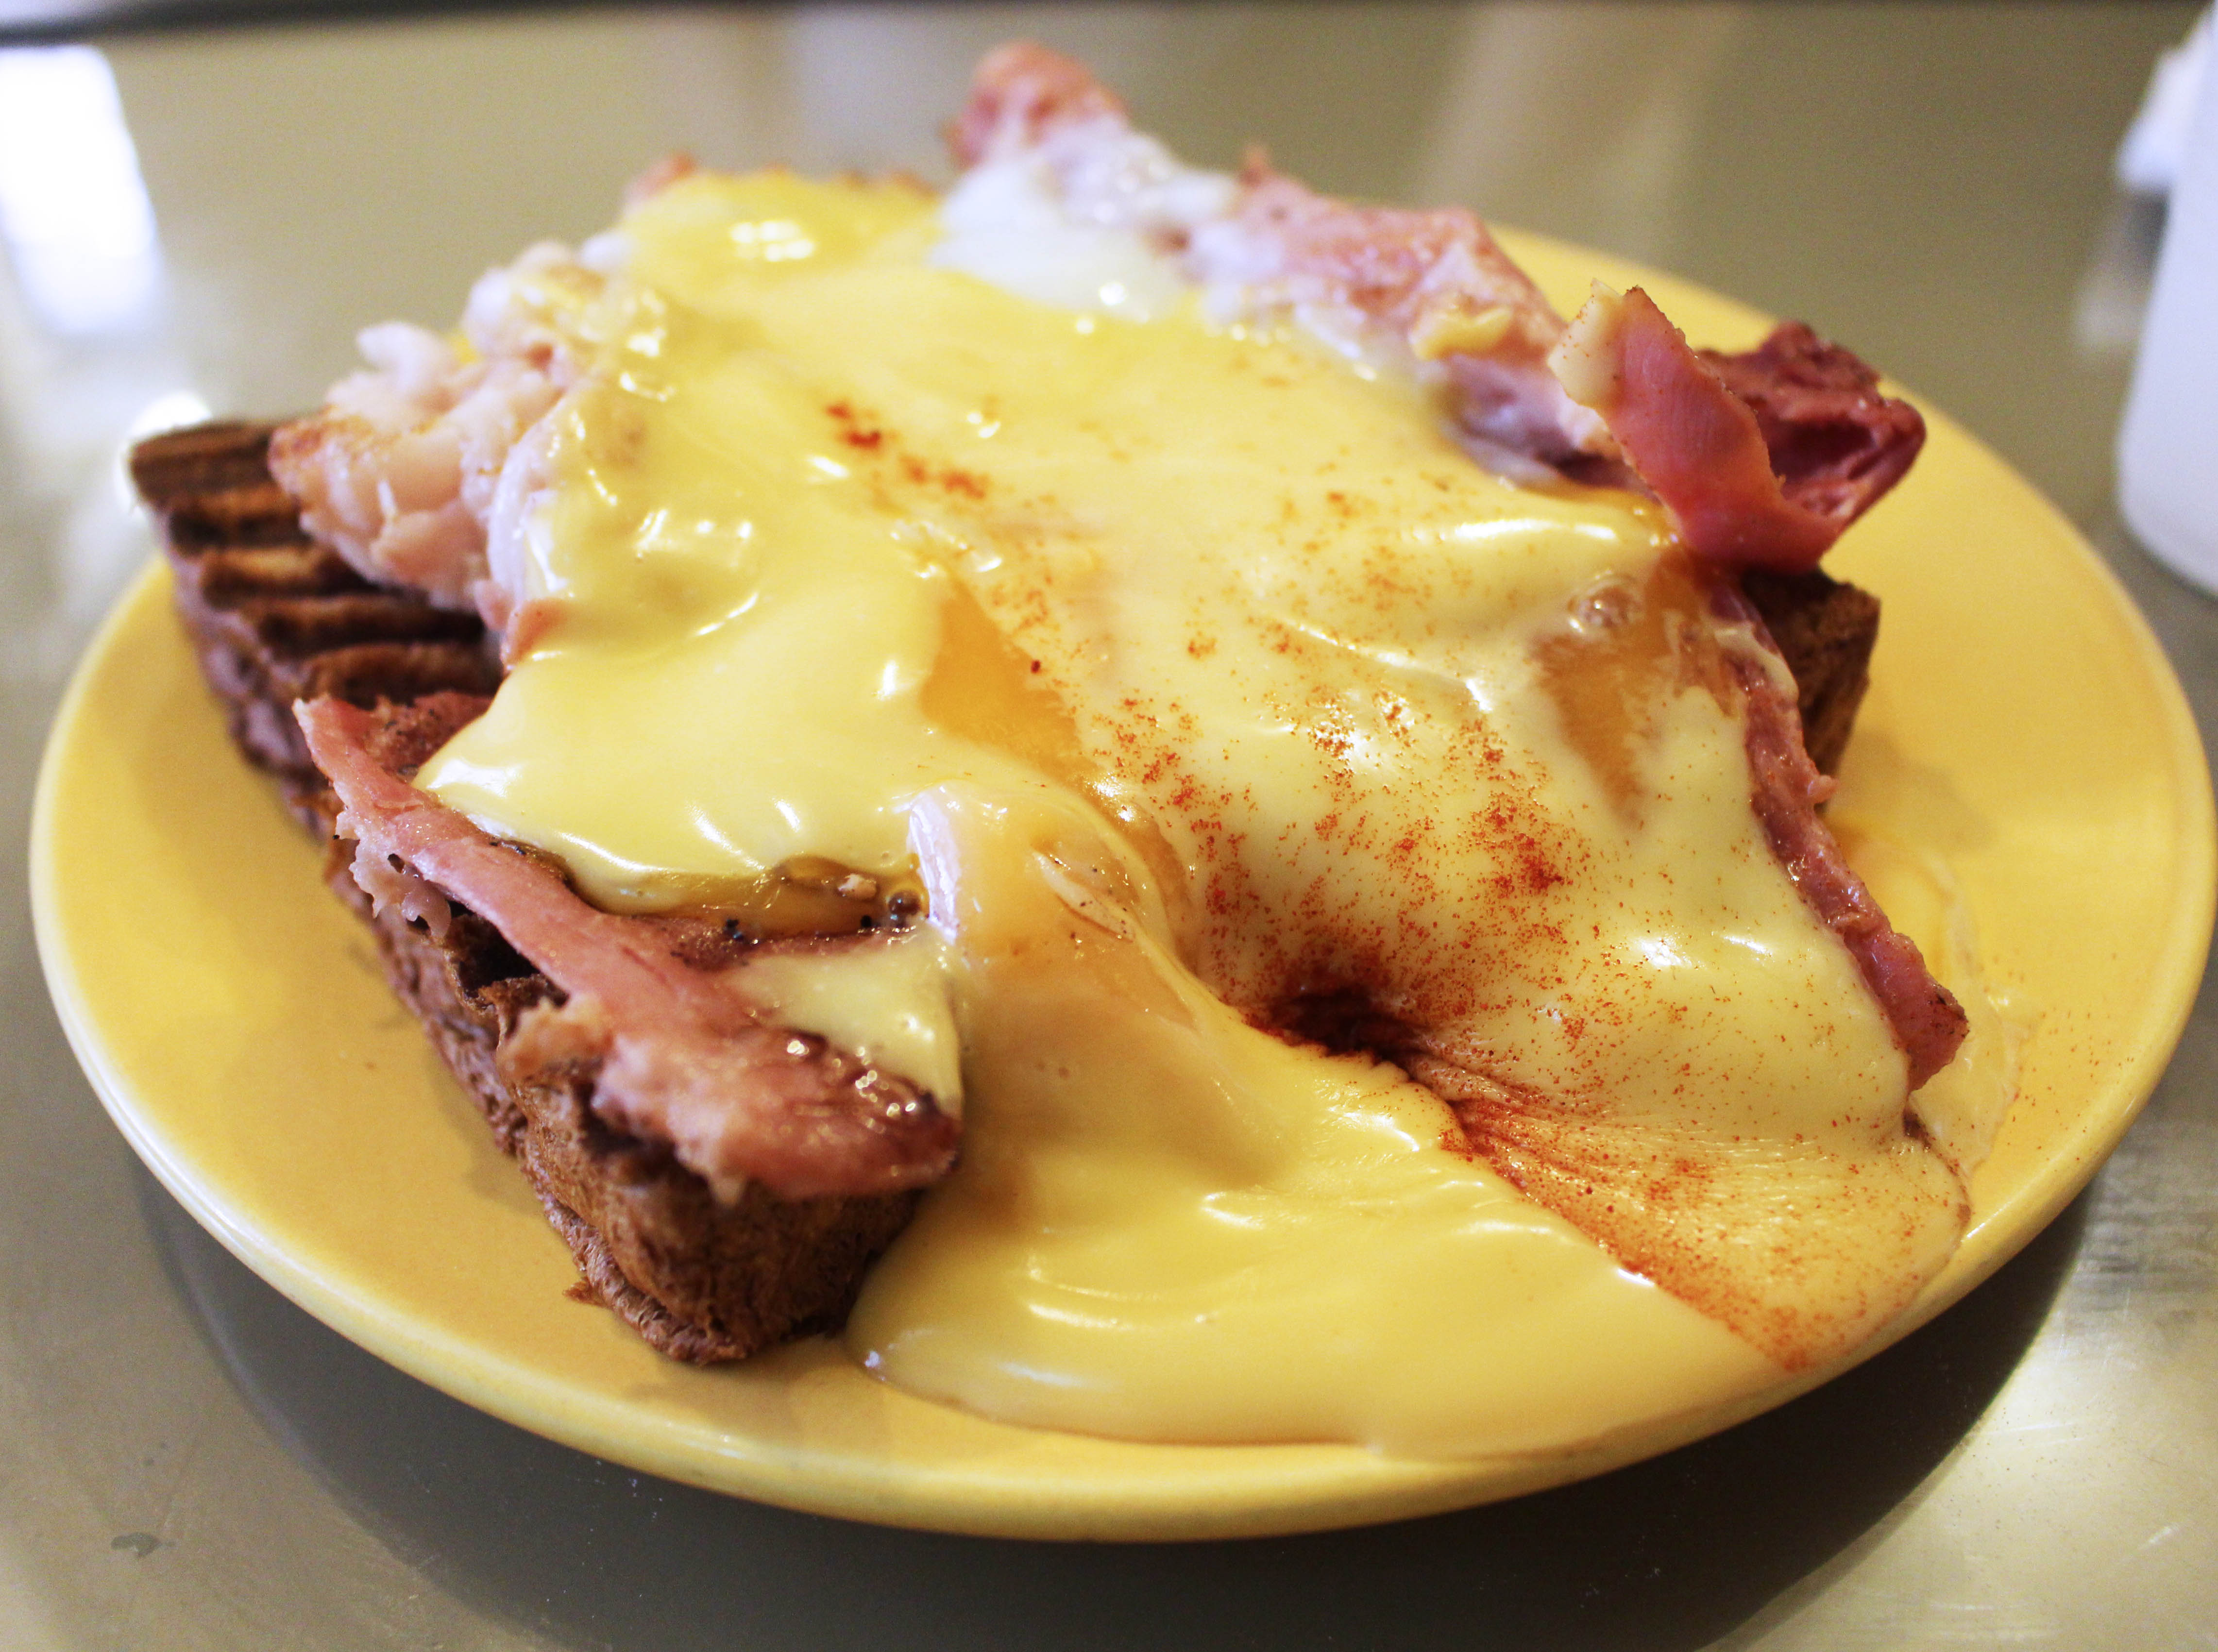 Overflowing eggs with hollandaise sauce atop pieces of ham and toasted bread